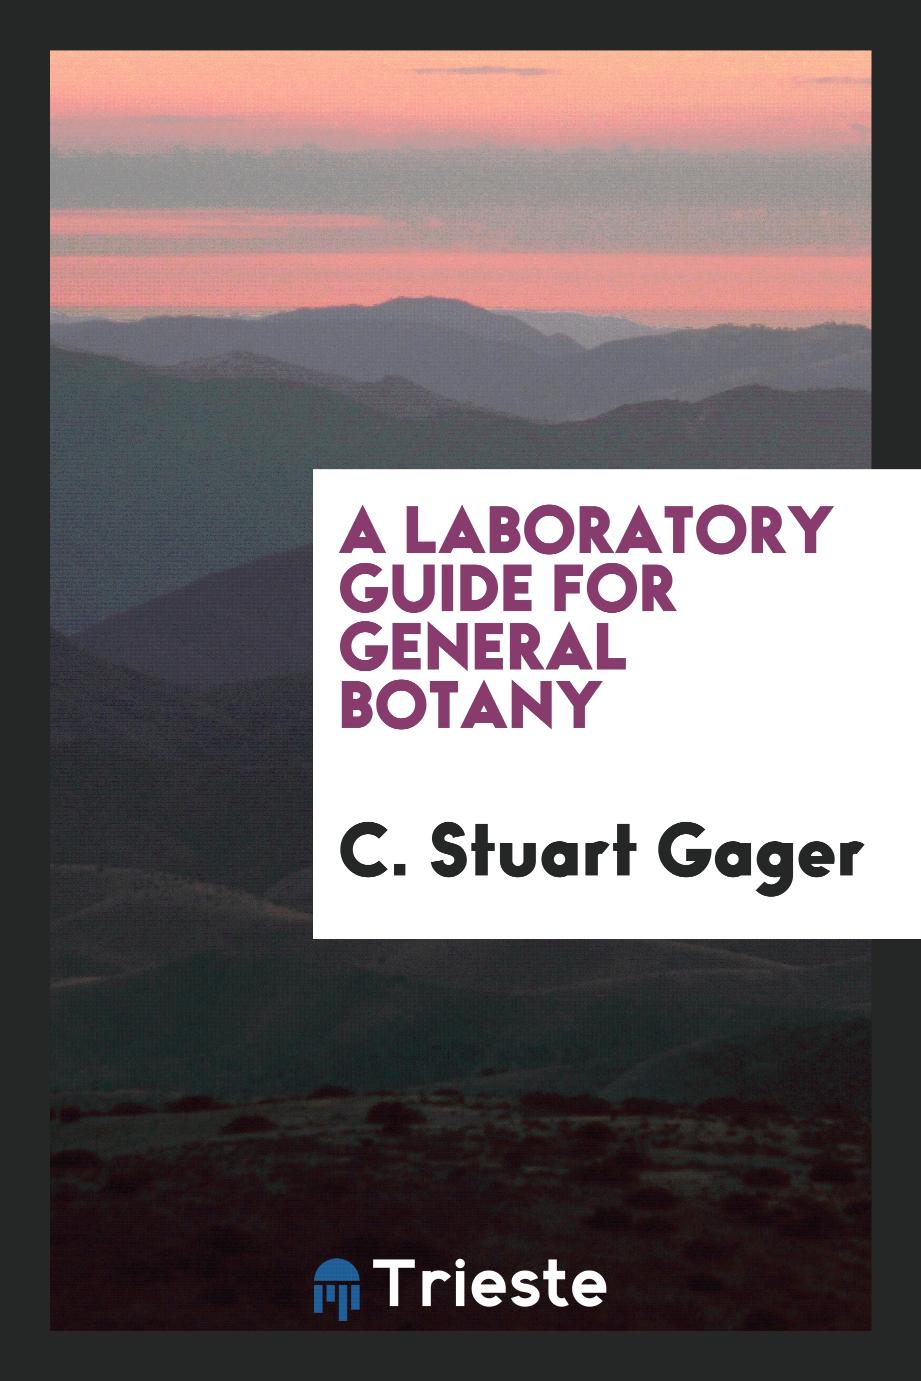 A laboratory guide for general botany